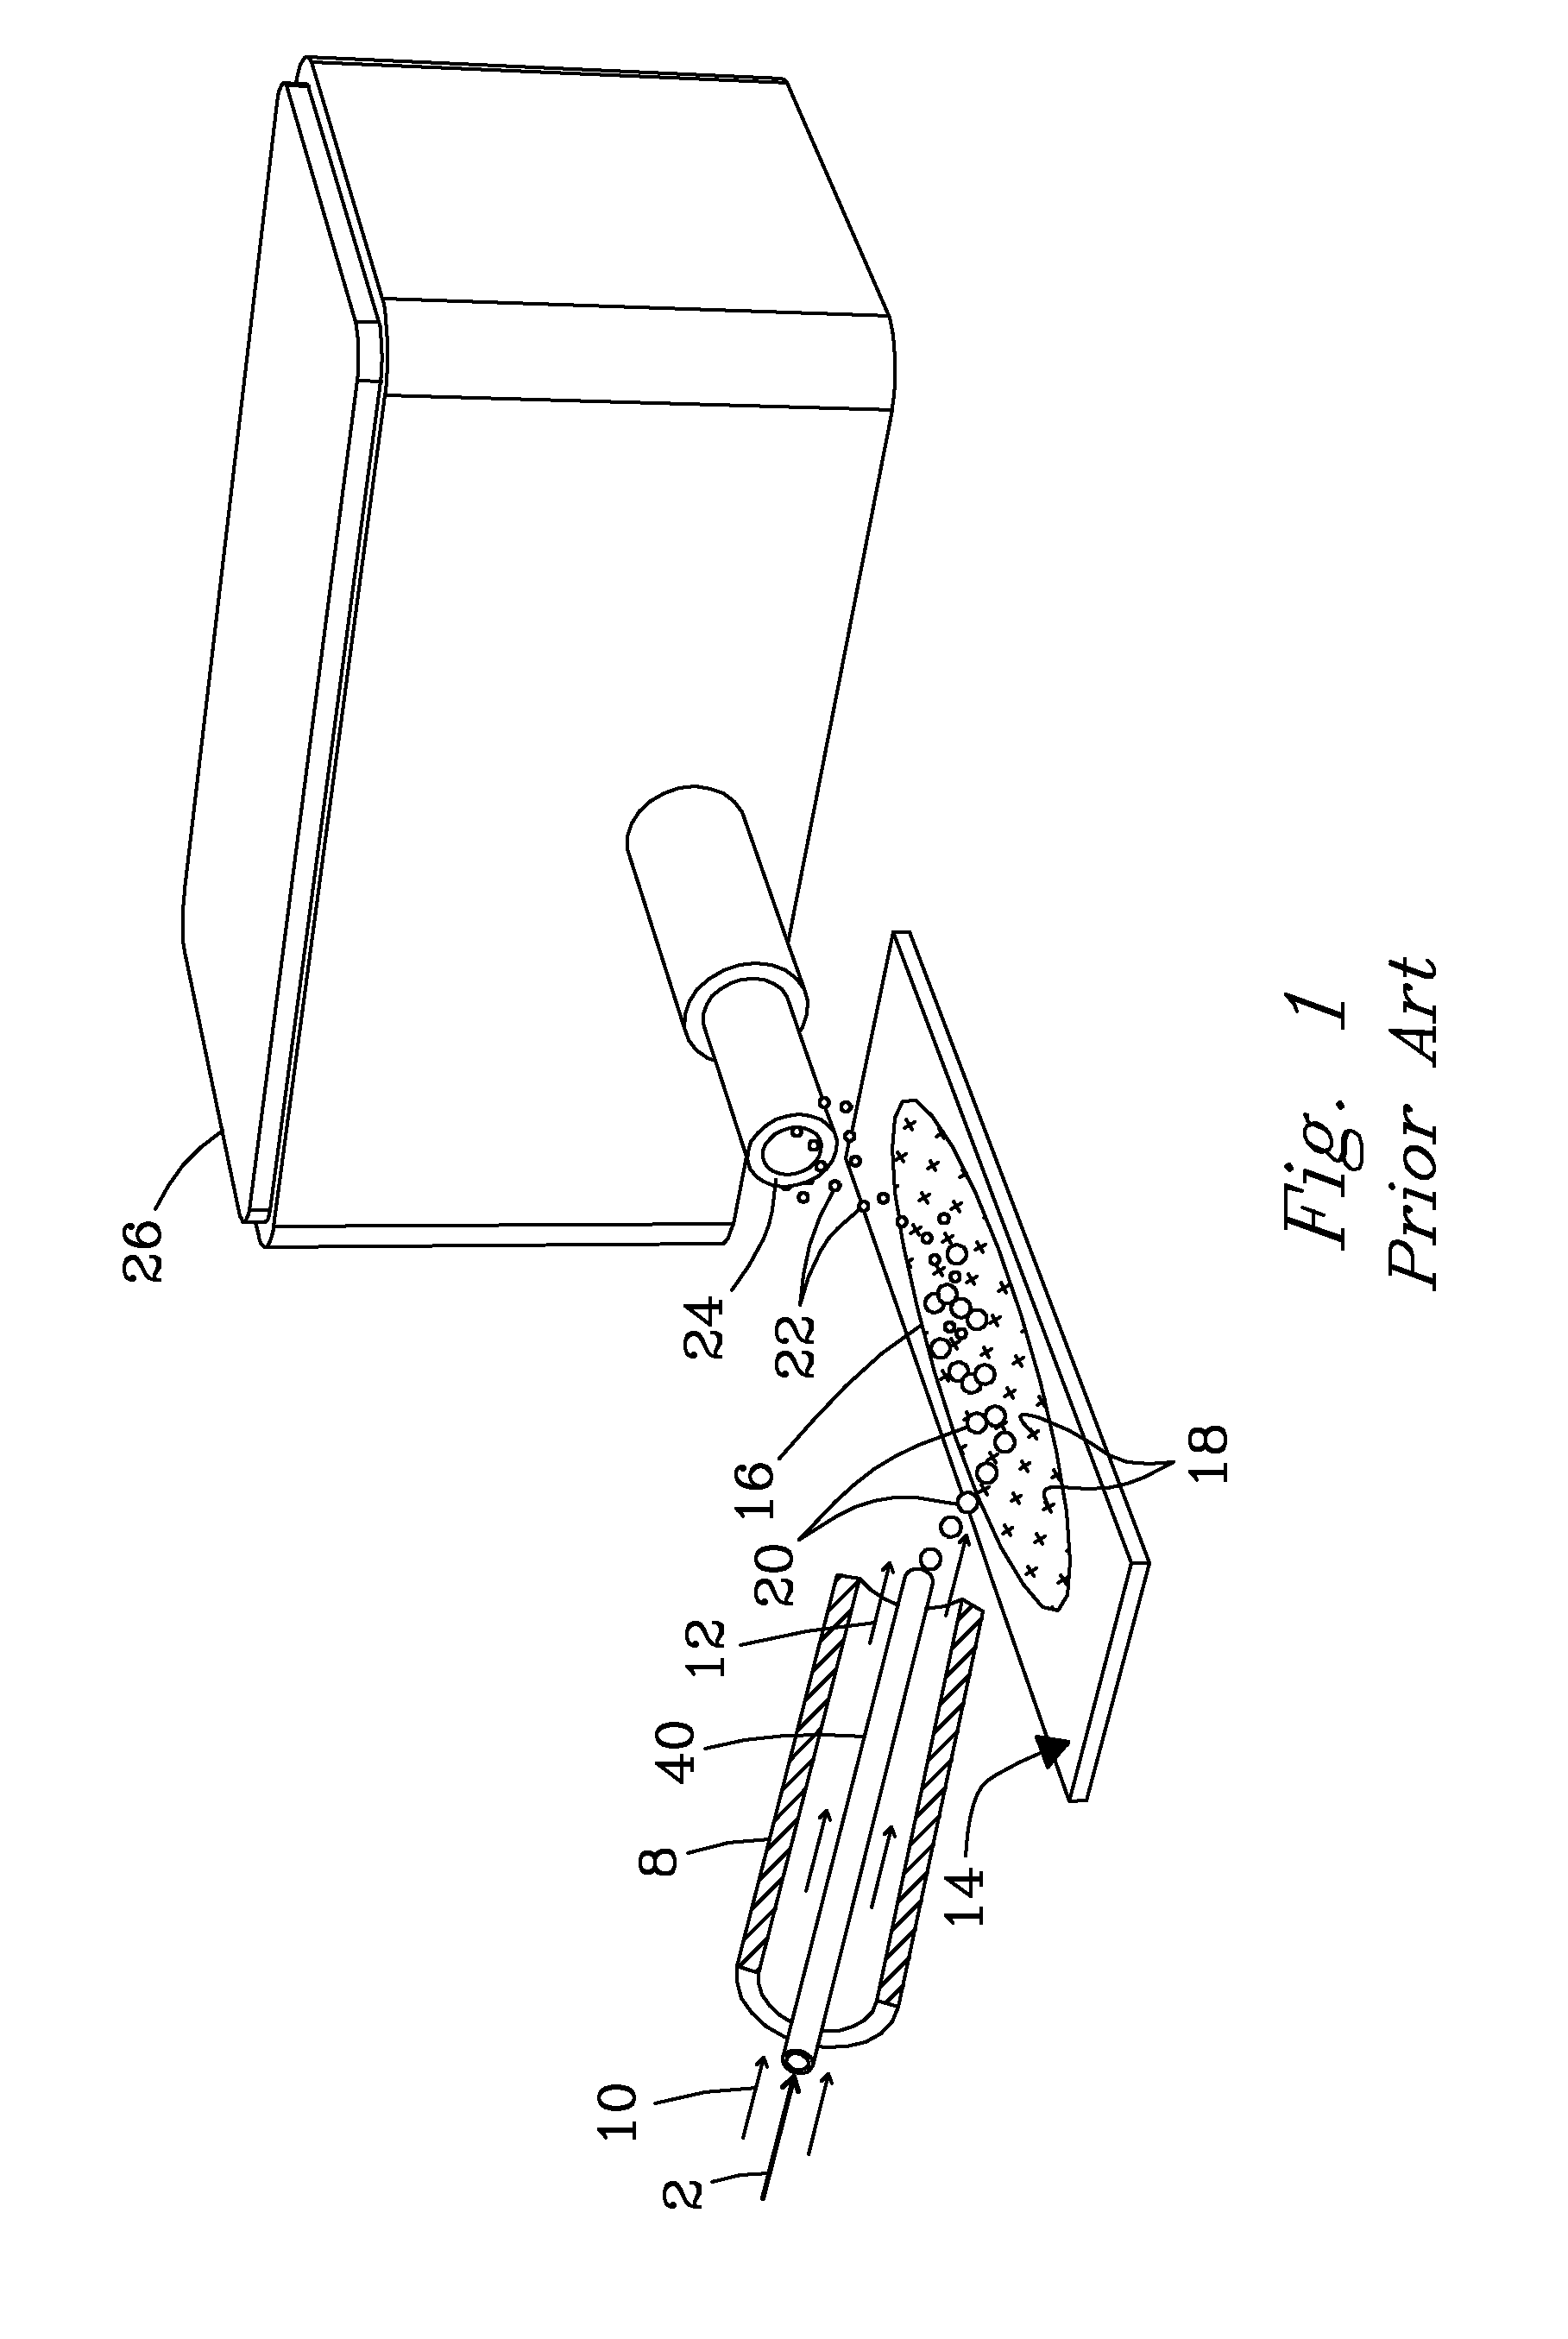 Focused analyte spray emission apparatus and process for mass spectrometric analysis